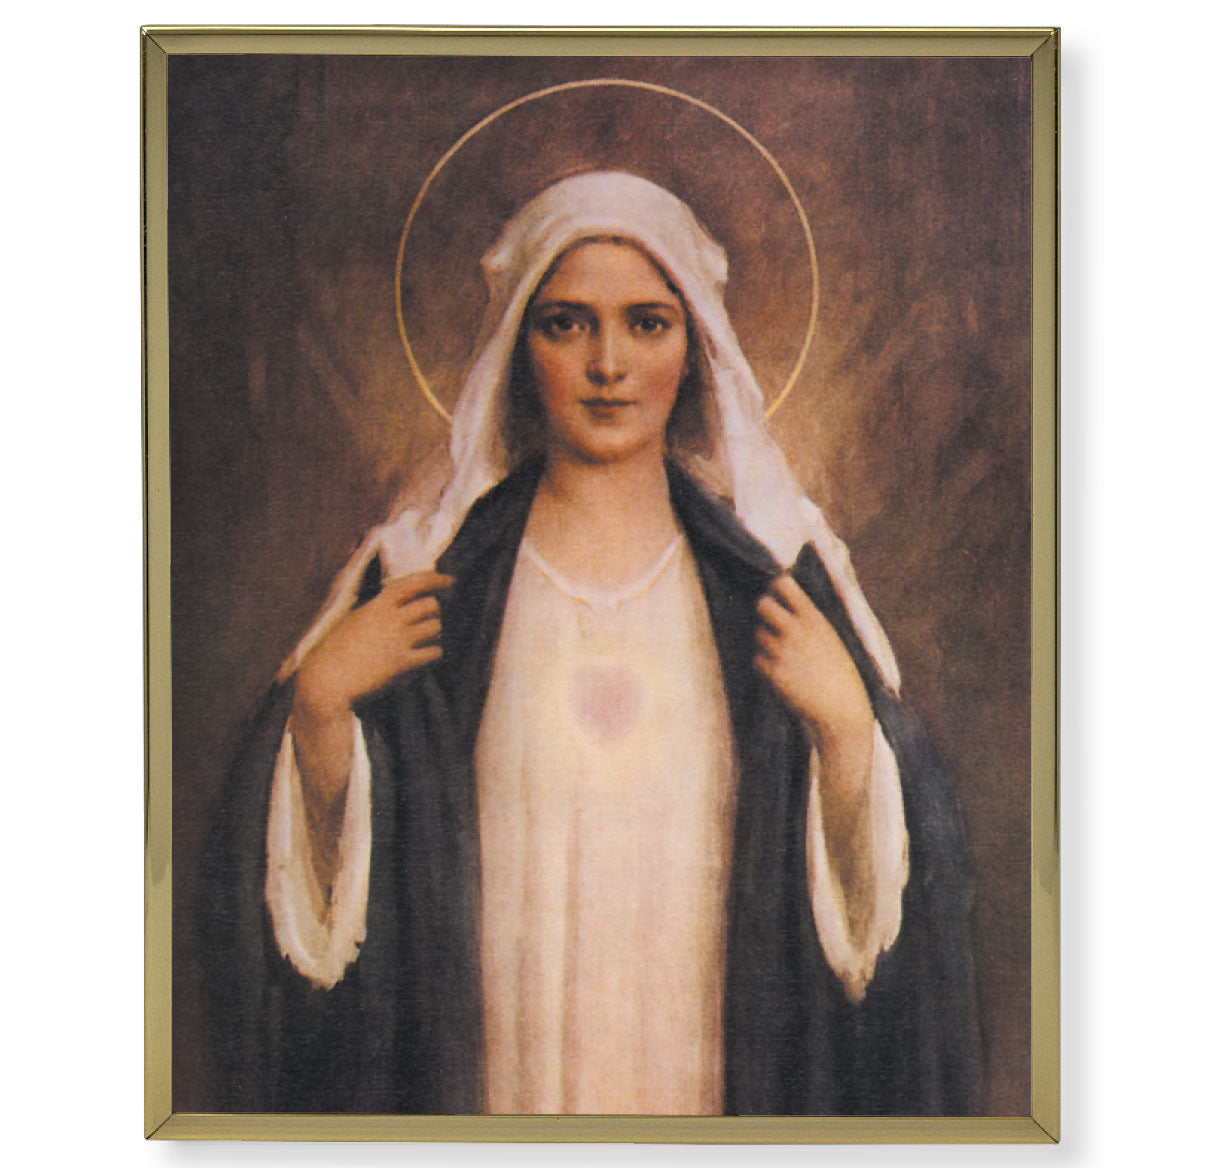 Immaculate Heart of Mary Picture Framed Plaque, Large, Gold Plaque Frame